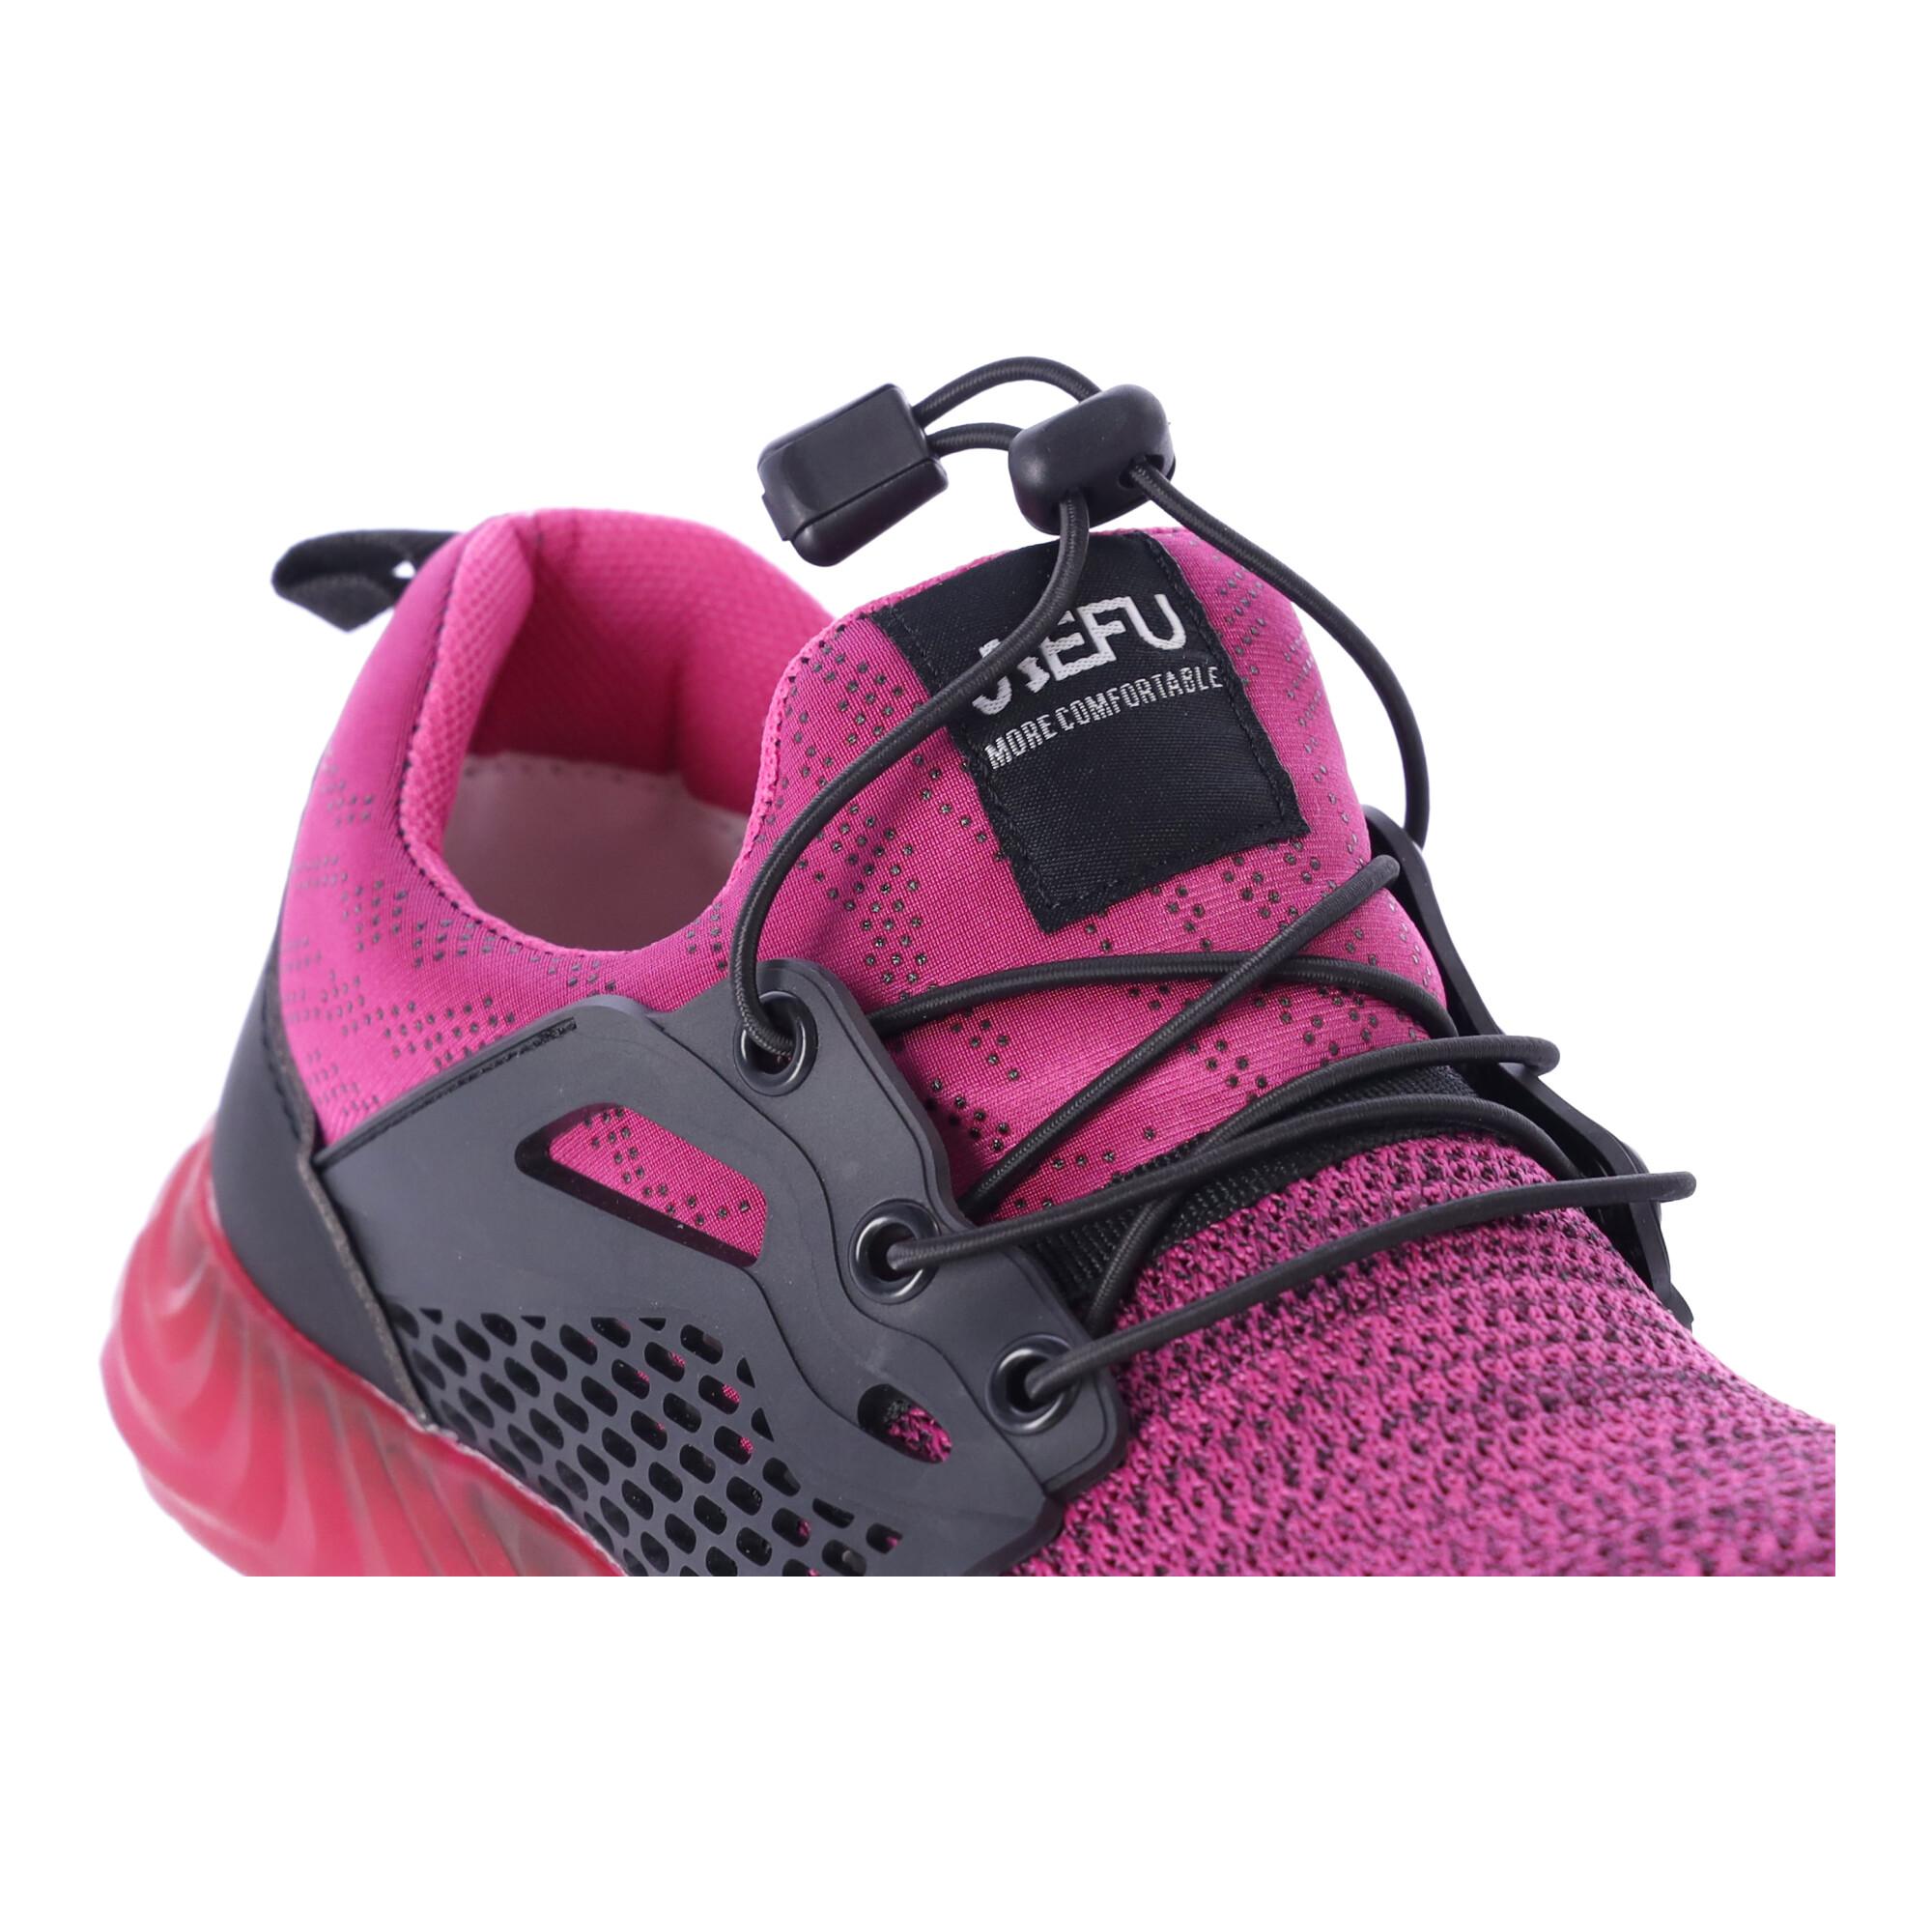 Work safety shoes "36" - pink